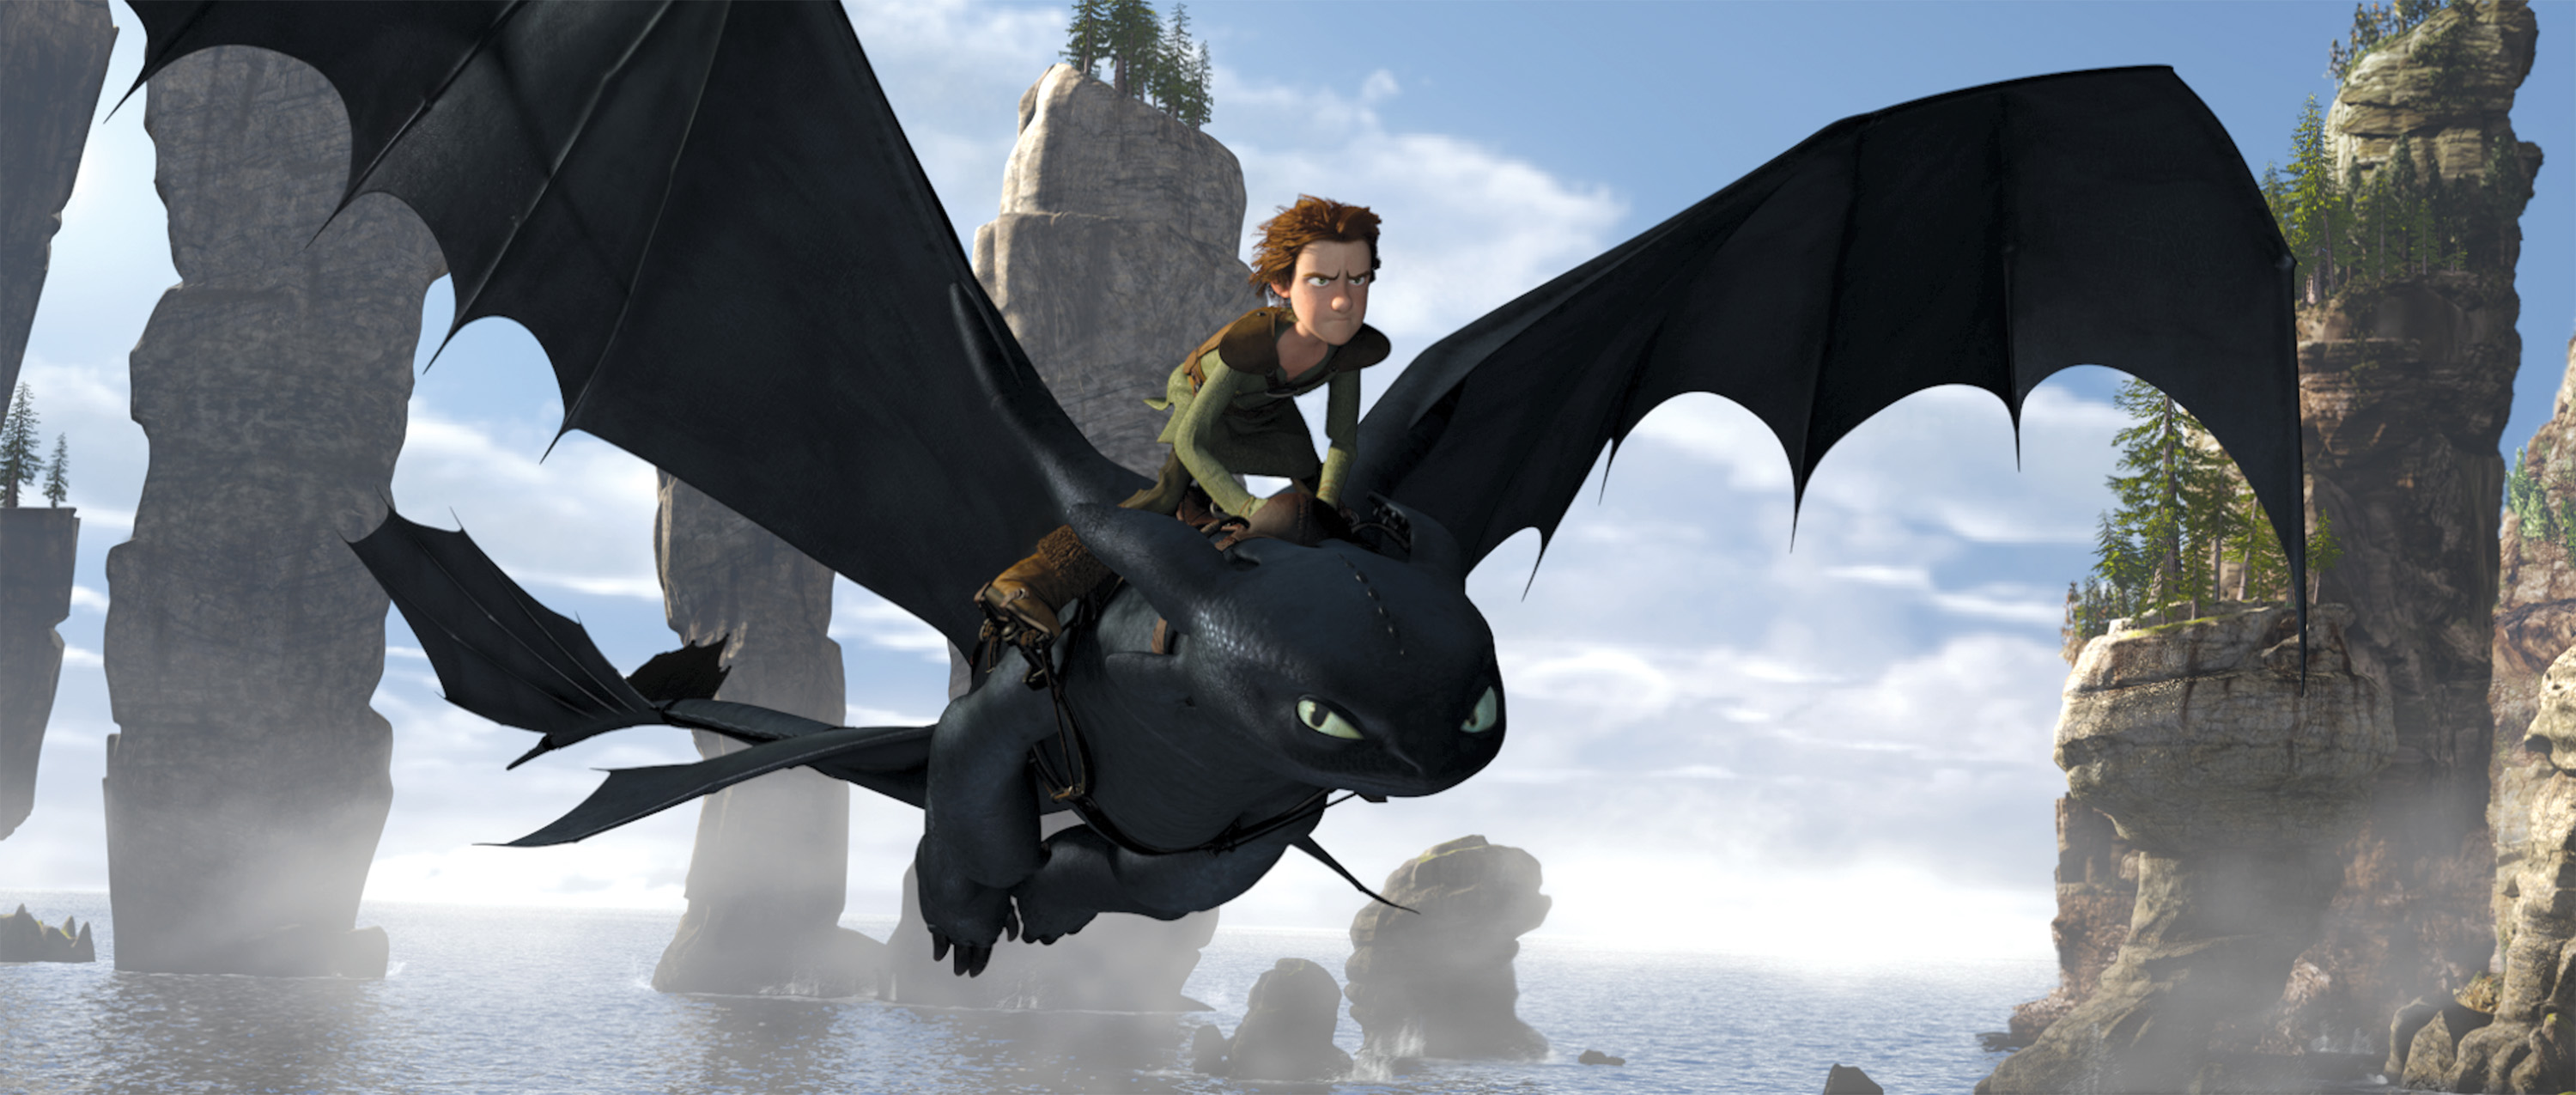 How to Train Your Dragon watch online UK